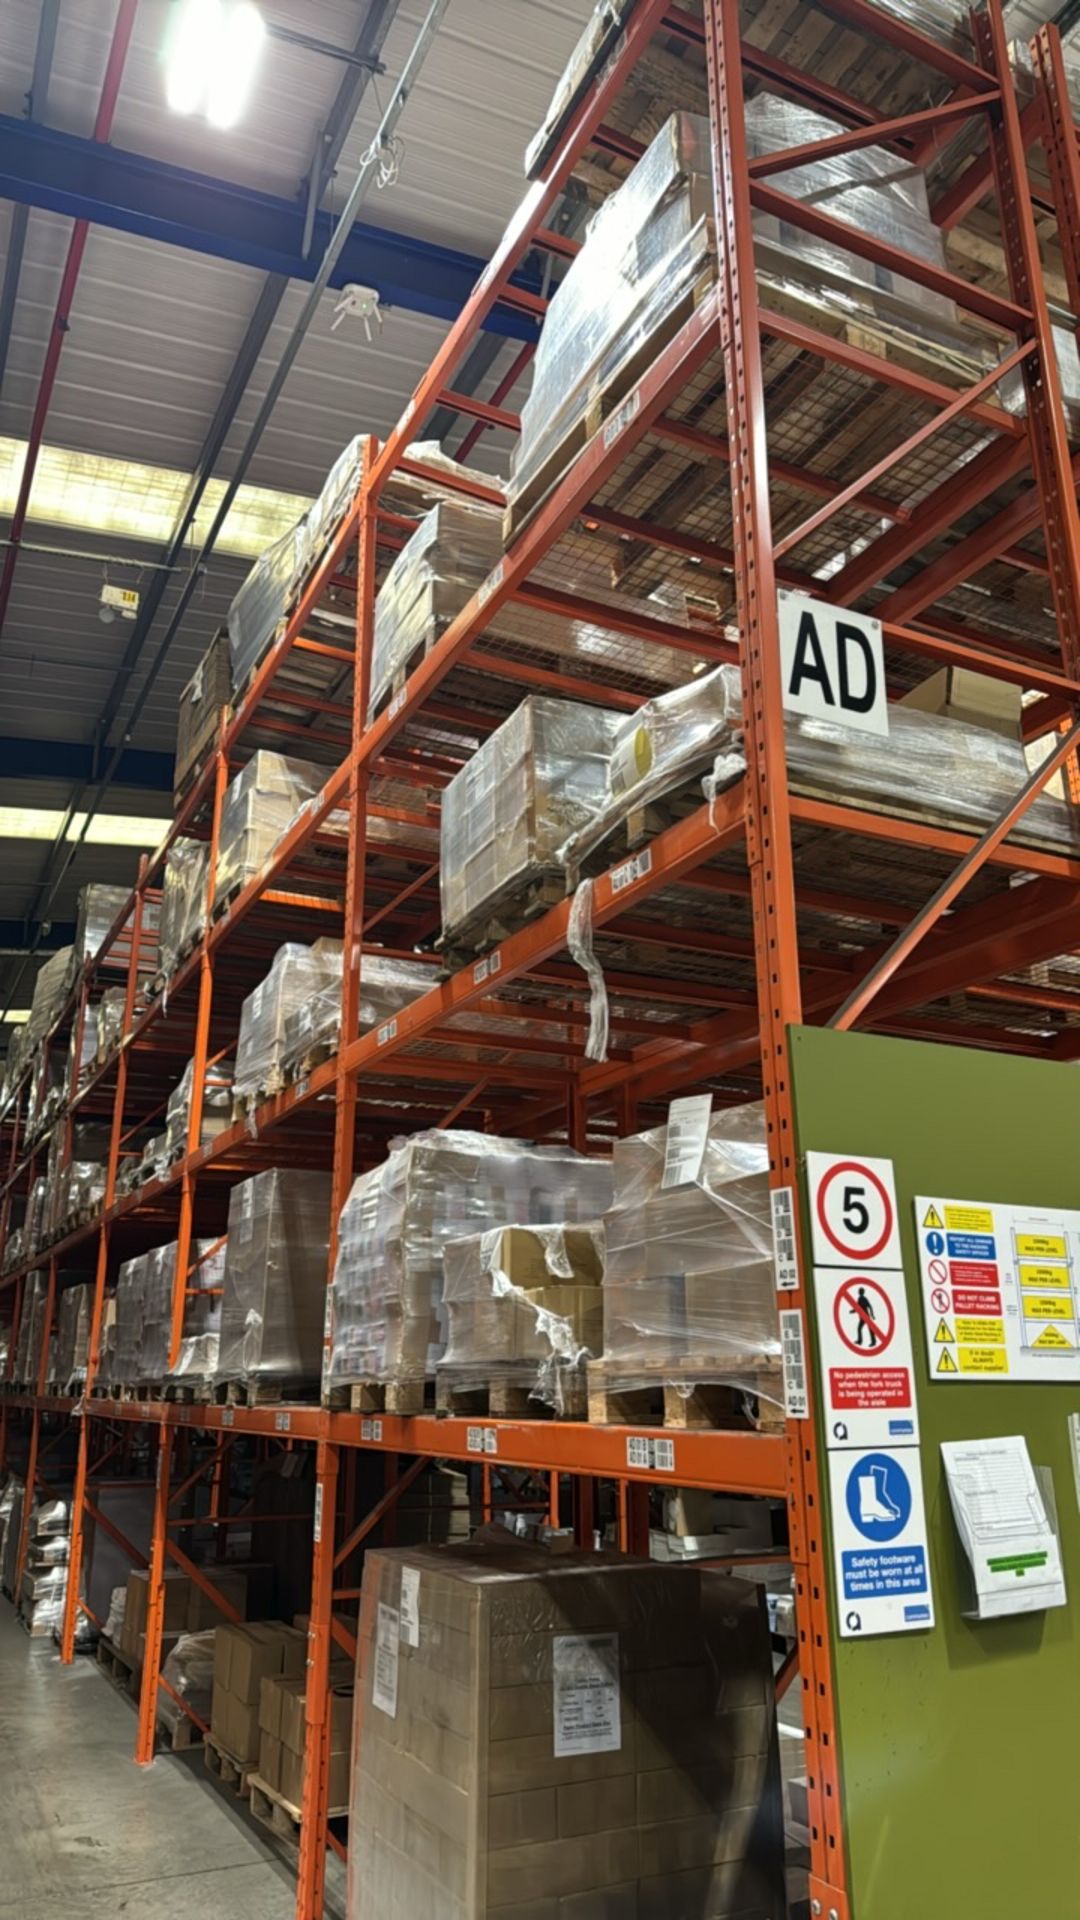 23 Bays Of Boltless Pallet Racking - Image 2 of 9